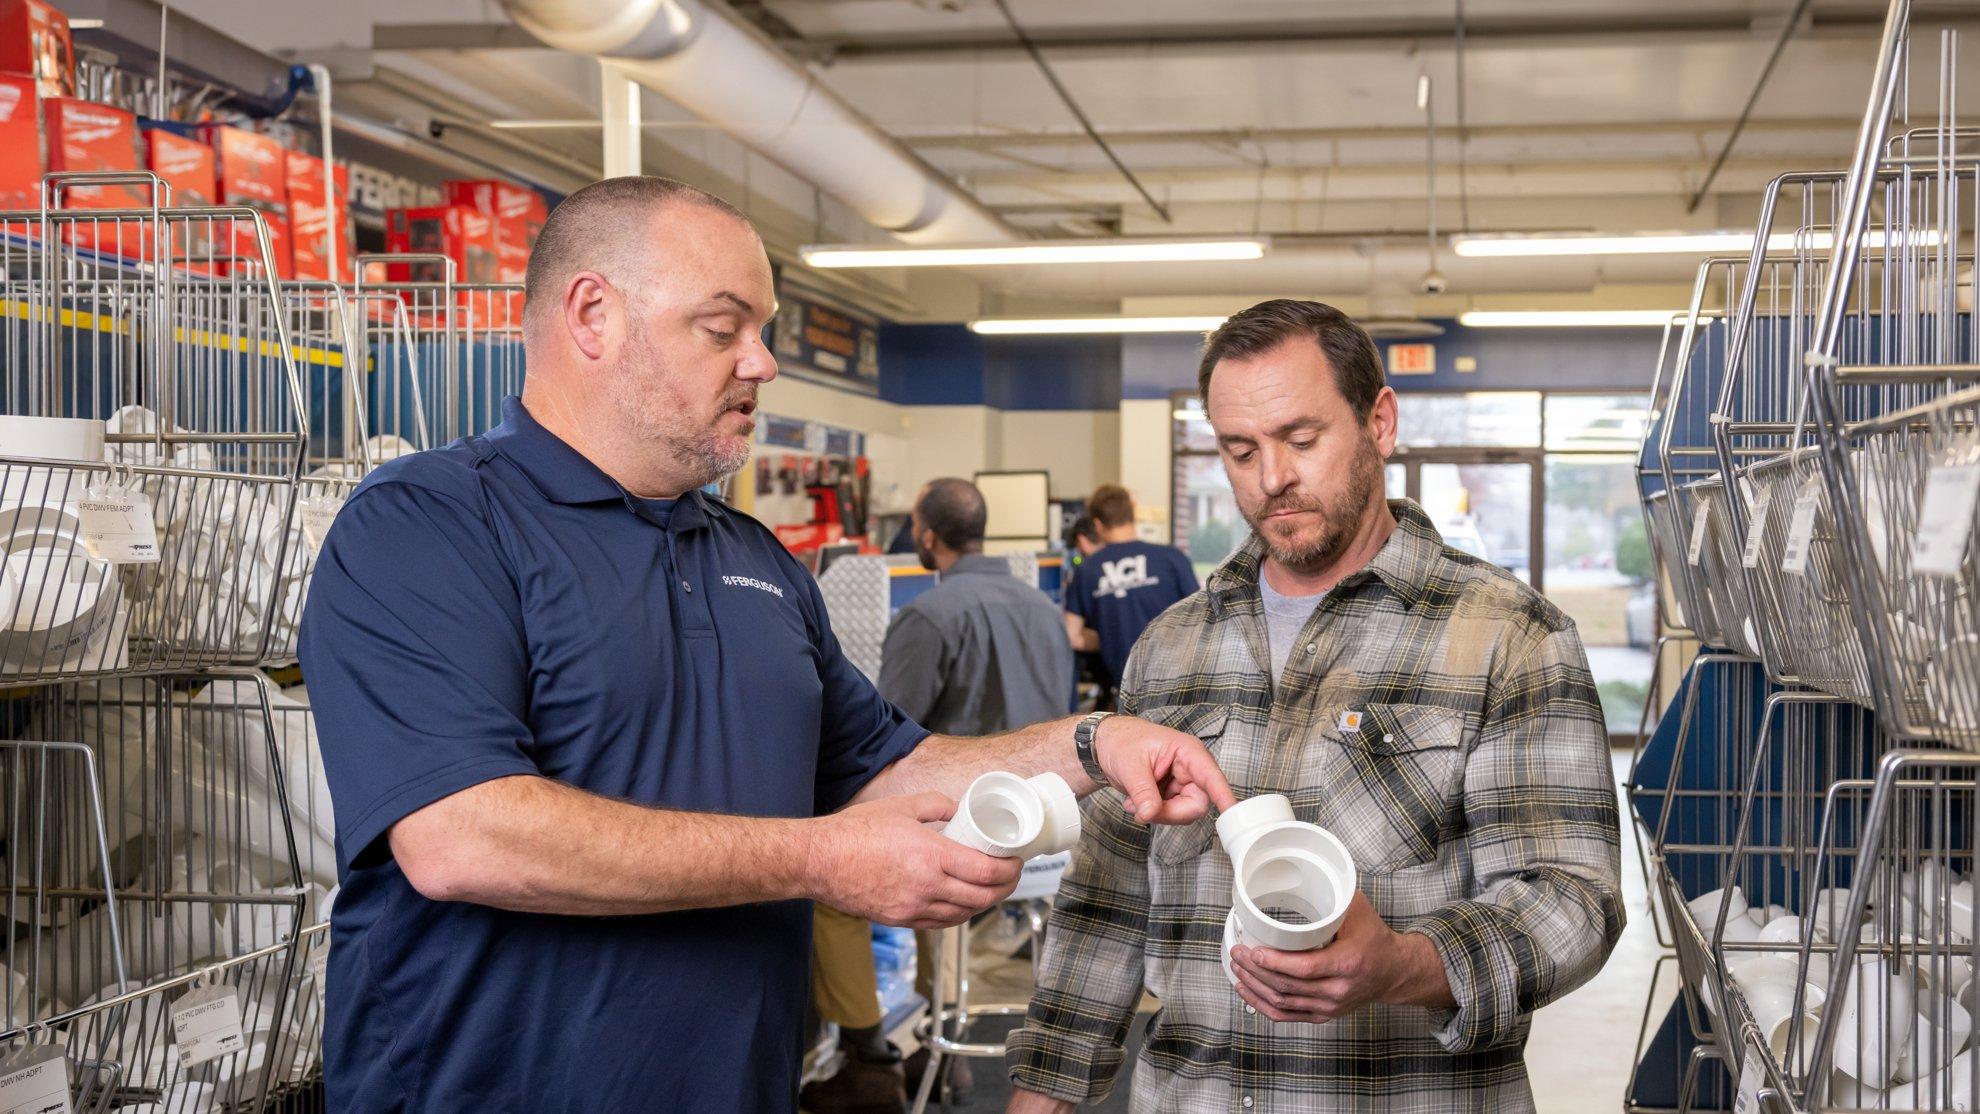 A Ferguson associate discusses pipe fittings with a customer at a counter location.